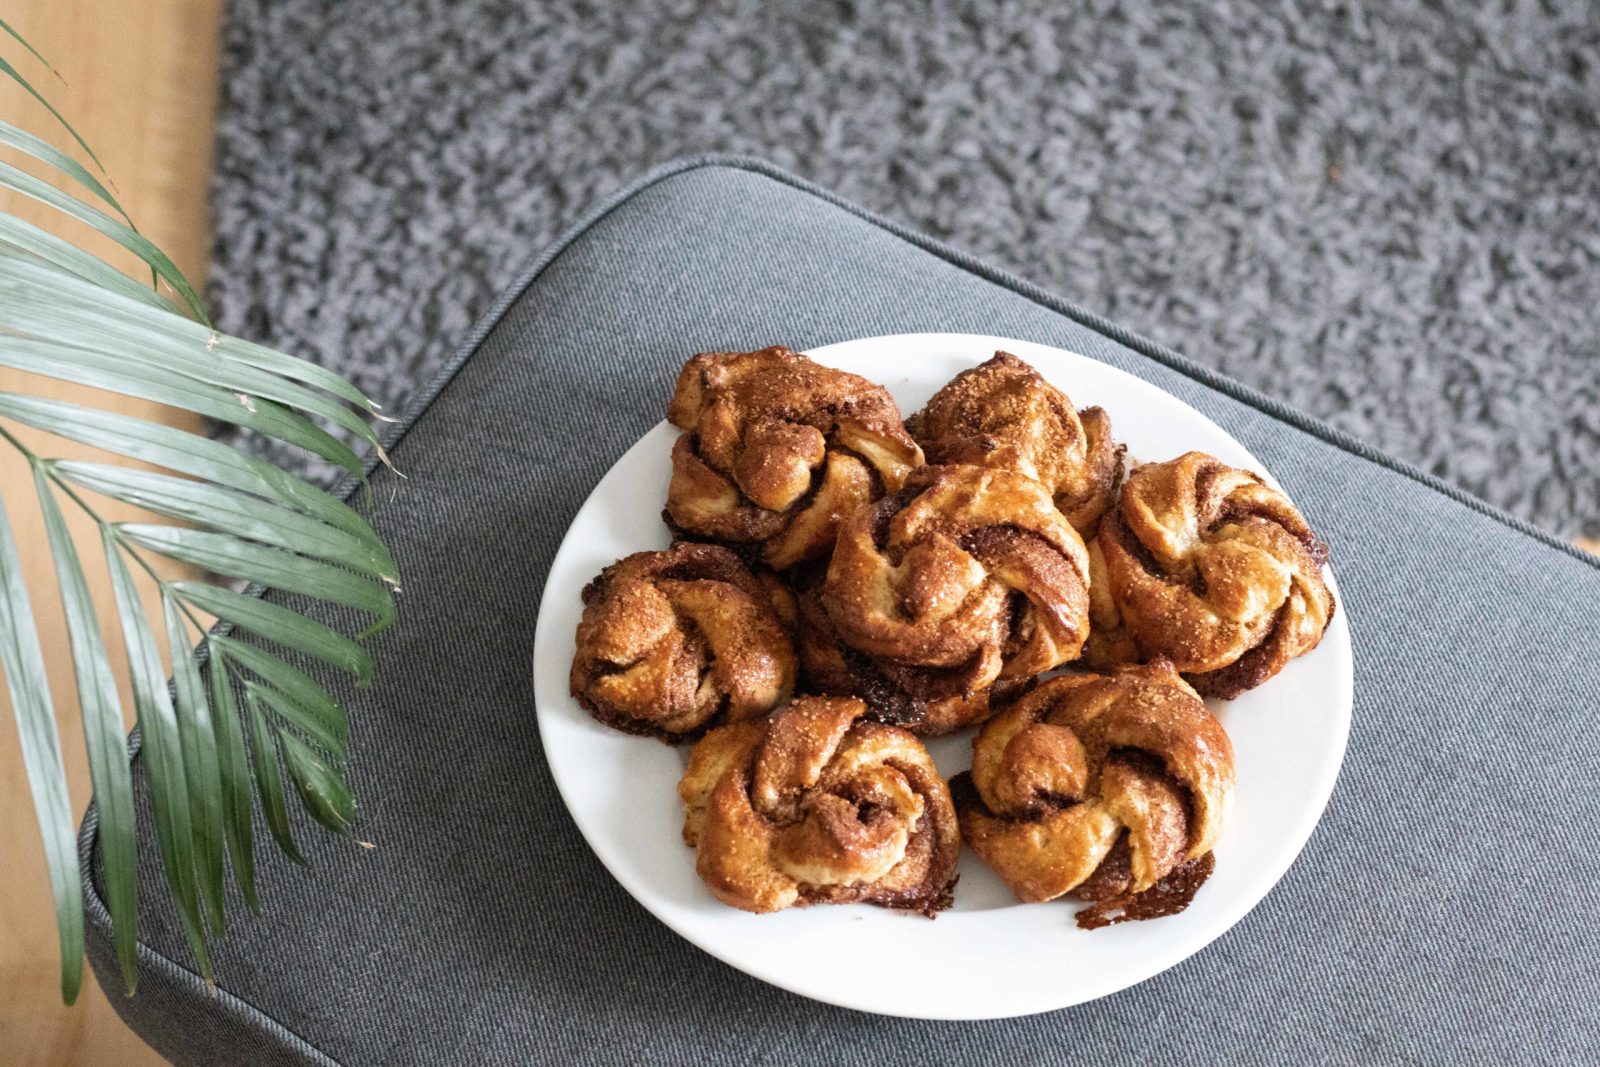 The cardamom rolls we all want to bake this autumn #hygge